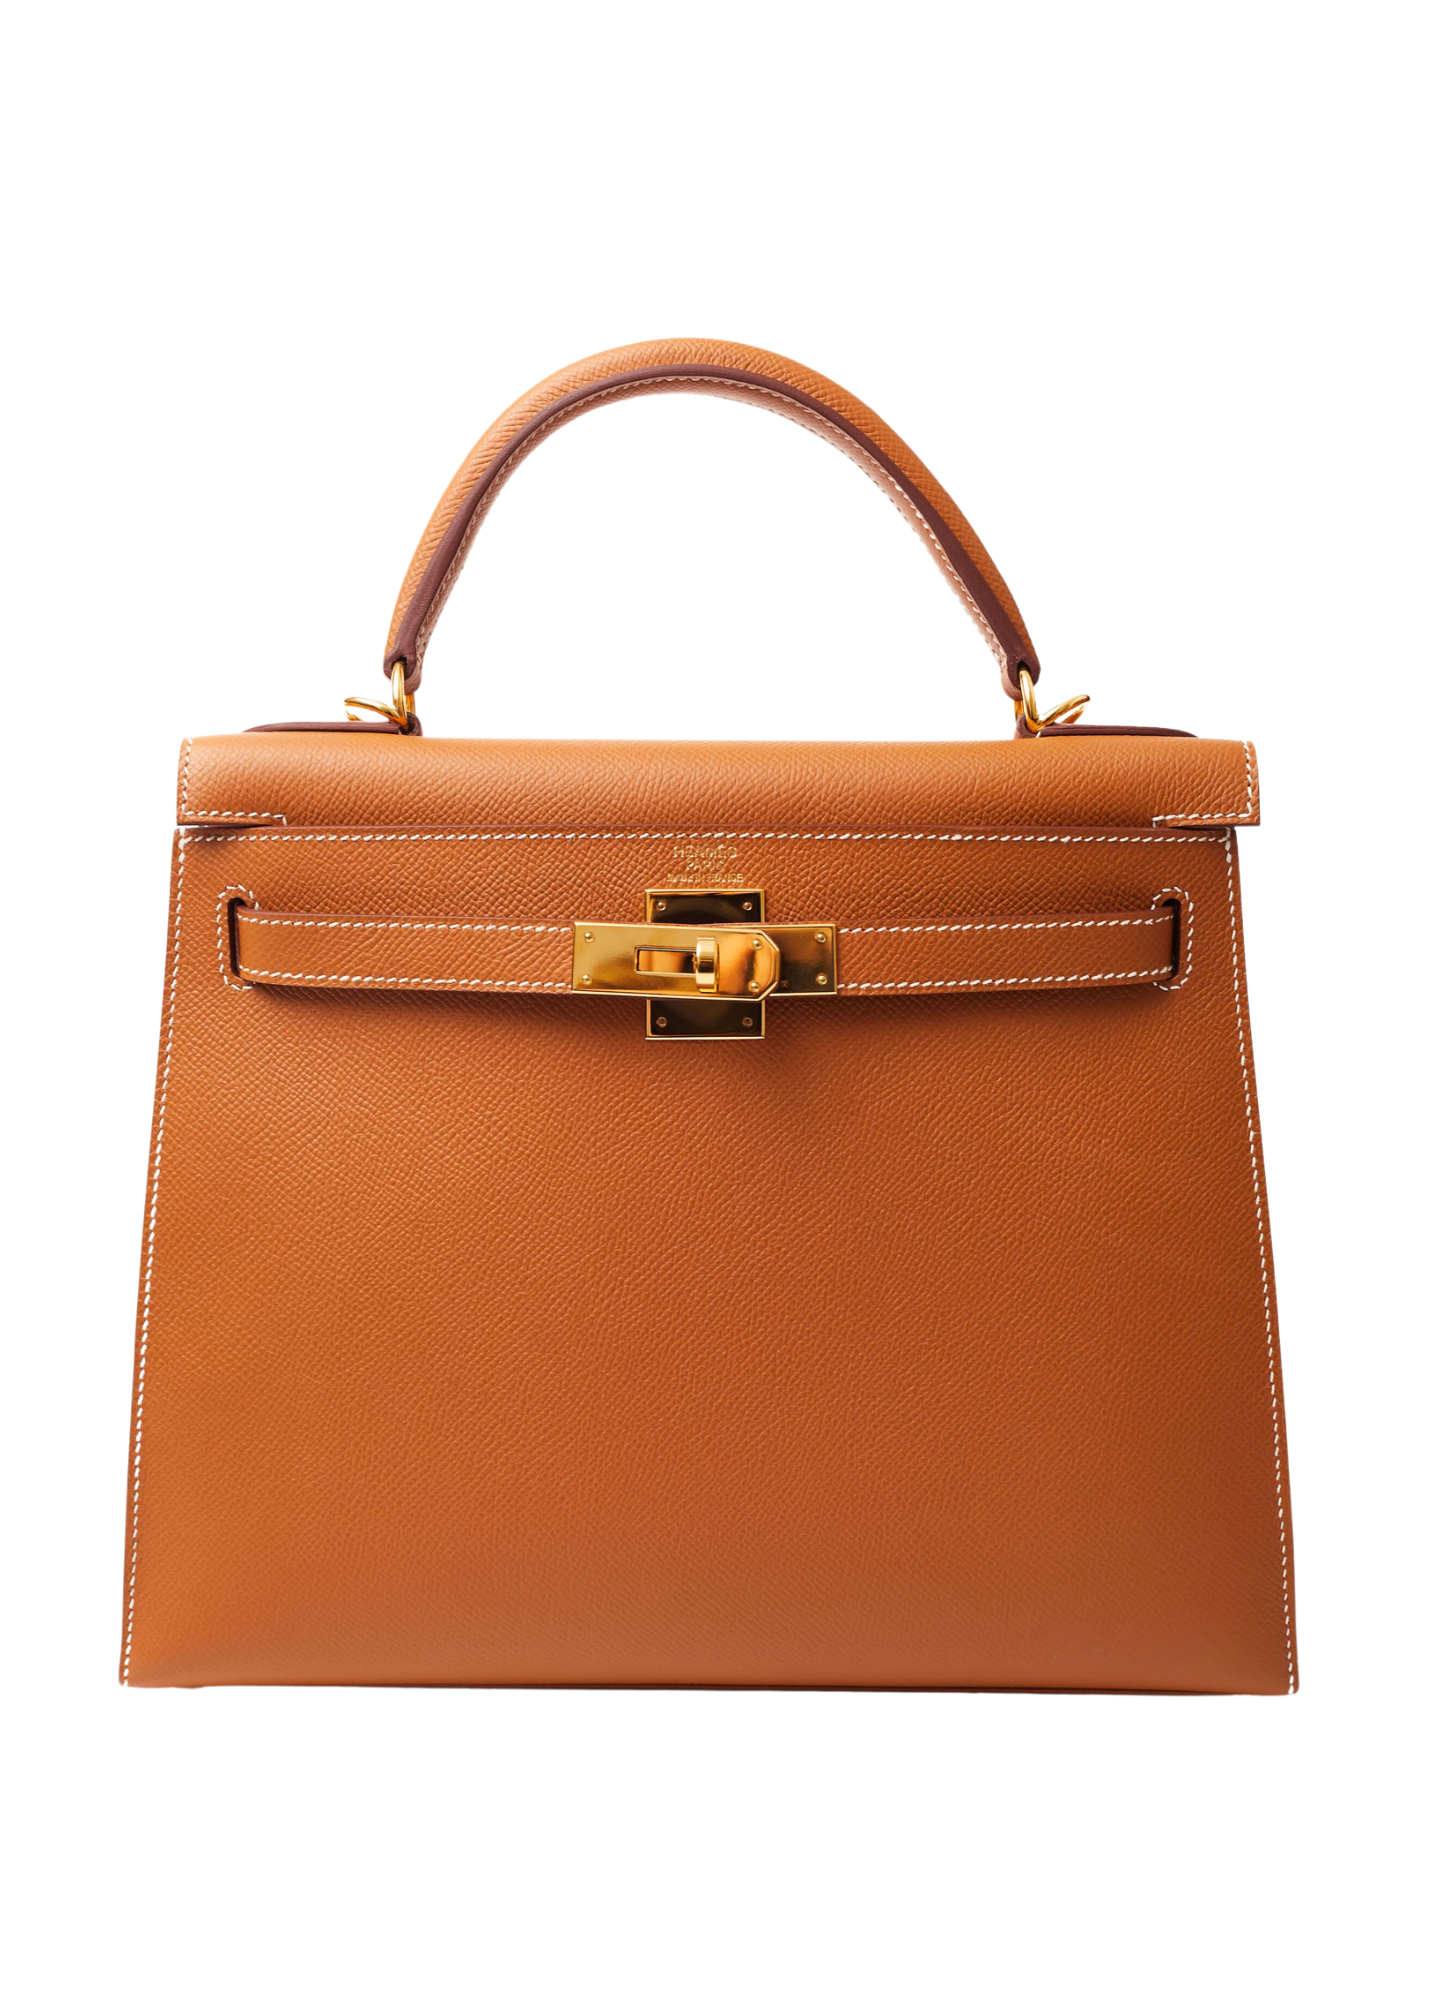 Hermès Paris <br> 2019 Kelly 28 in Gold Veau Epsom leather with Gold hardware